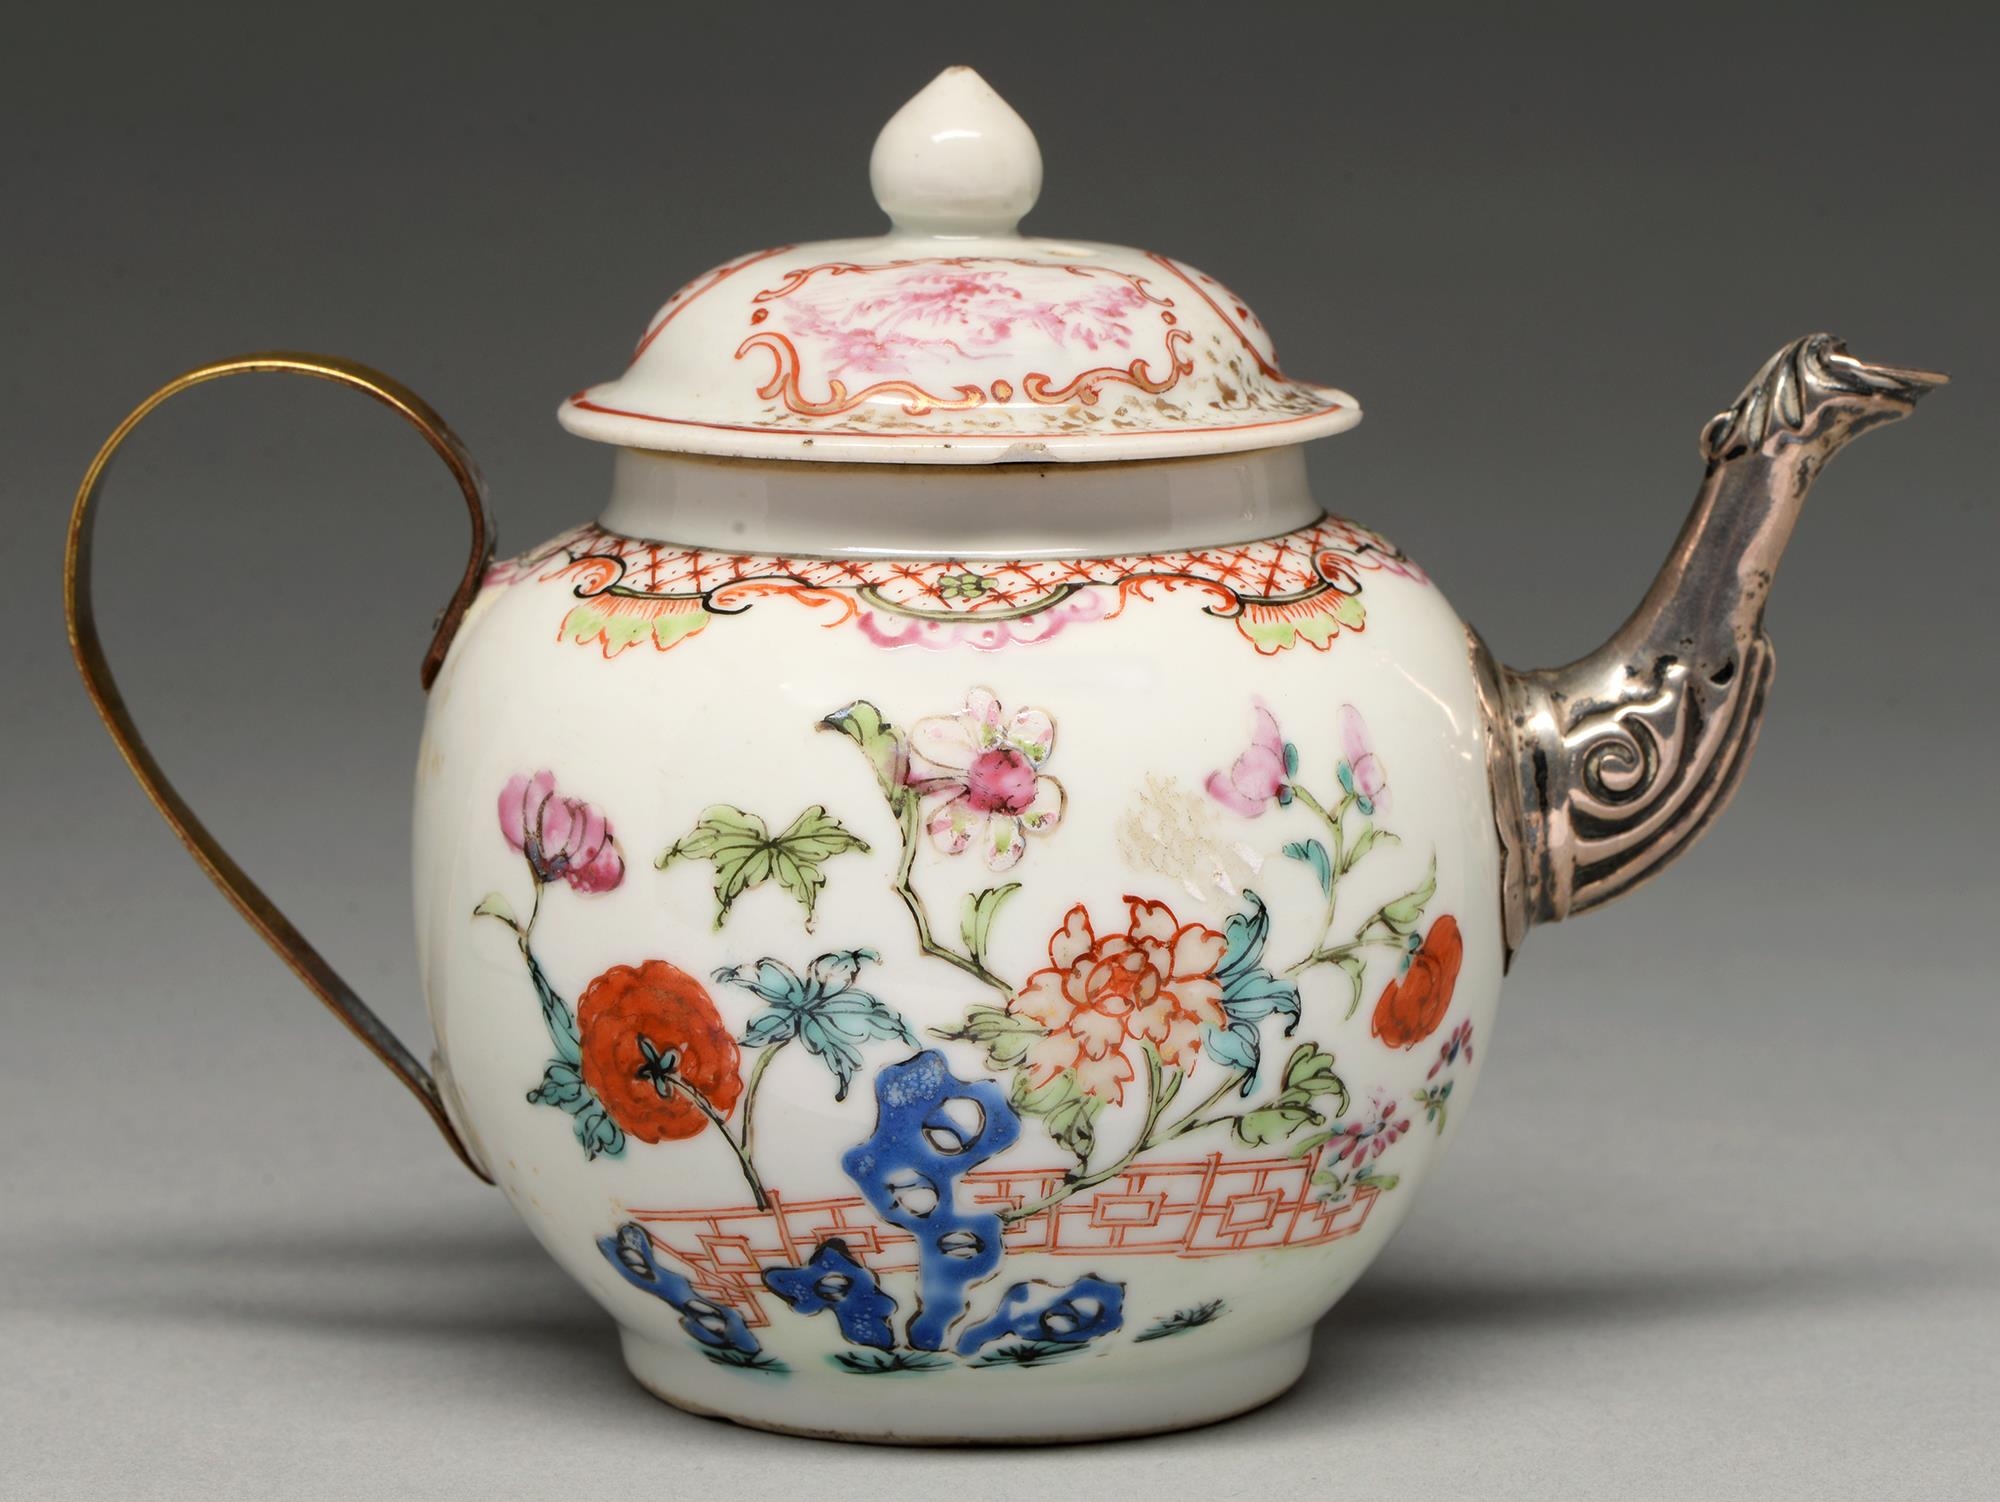 A Chinese famille rose teapot and a cover, c1770, enamelled with peonies and other flowers growing